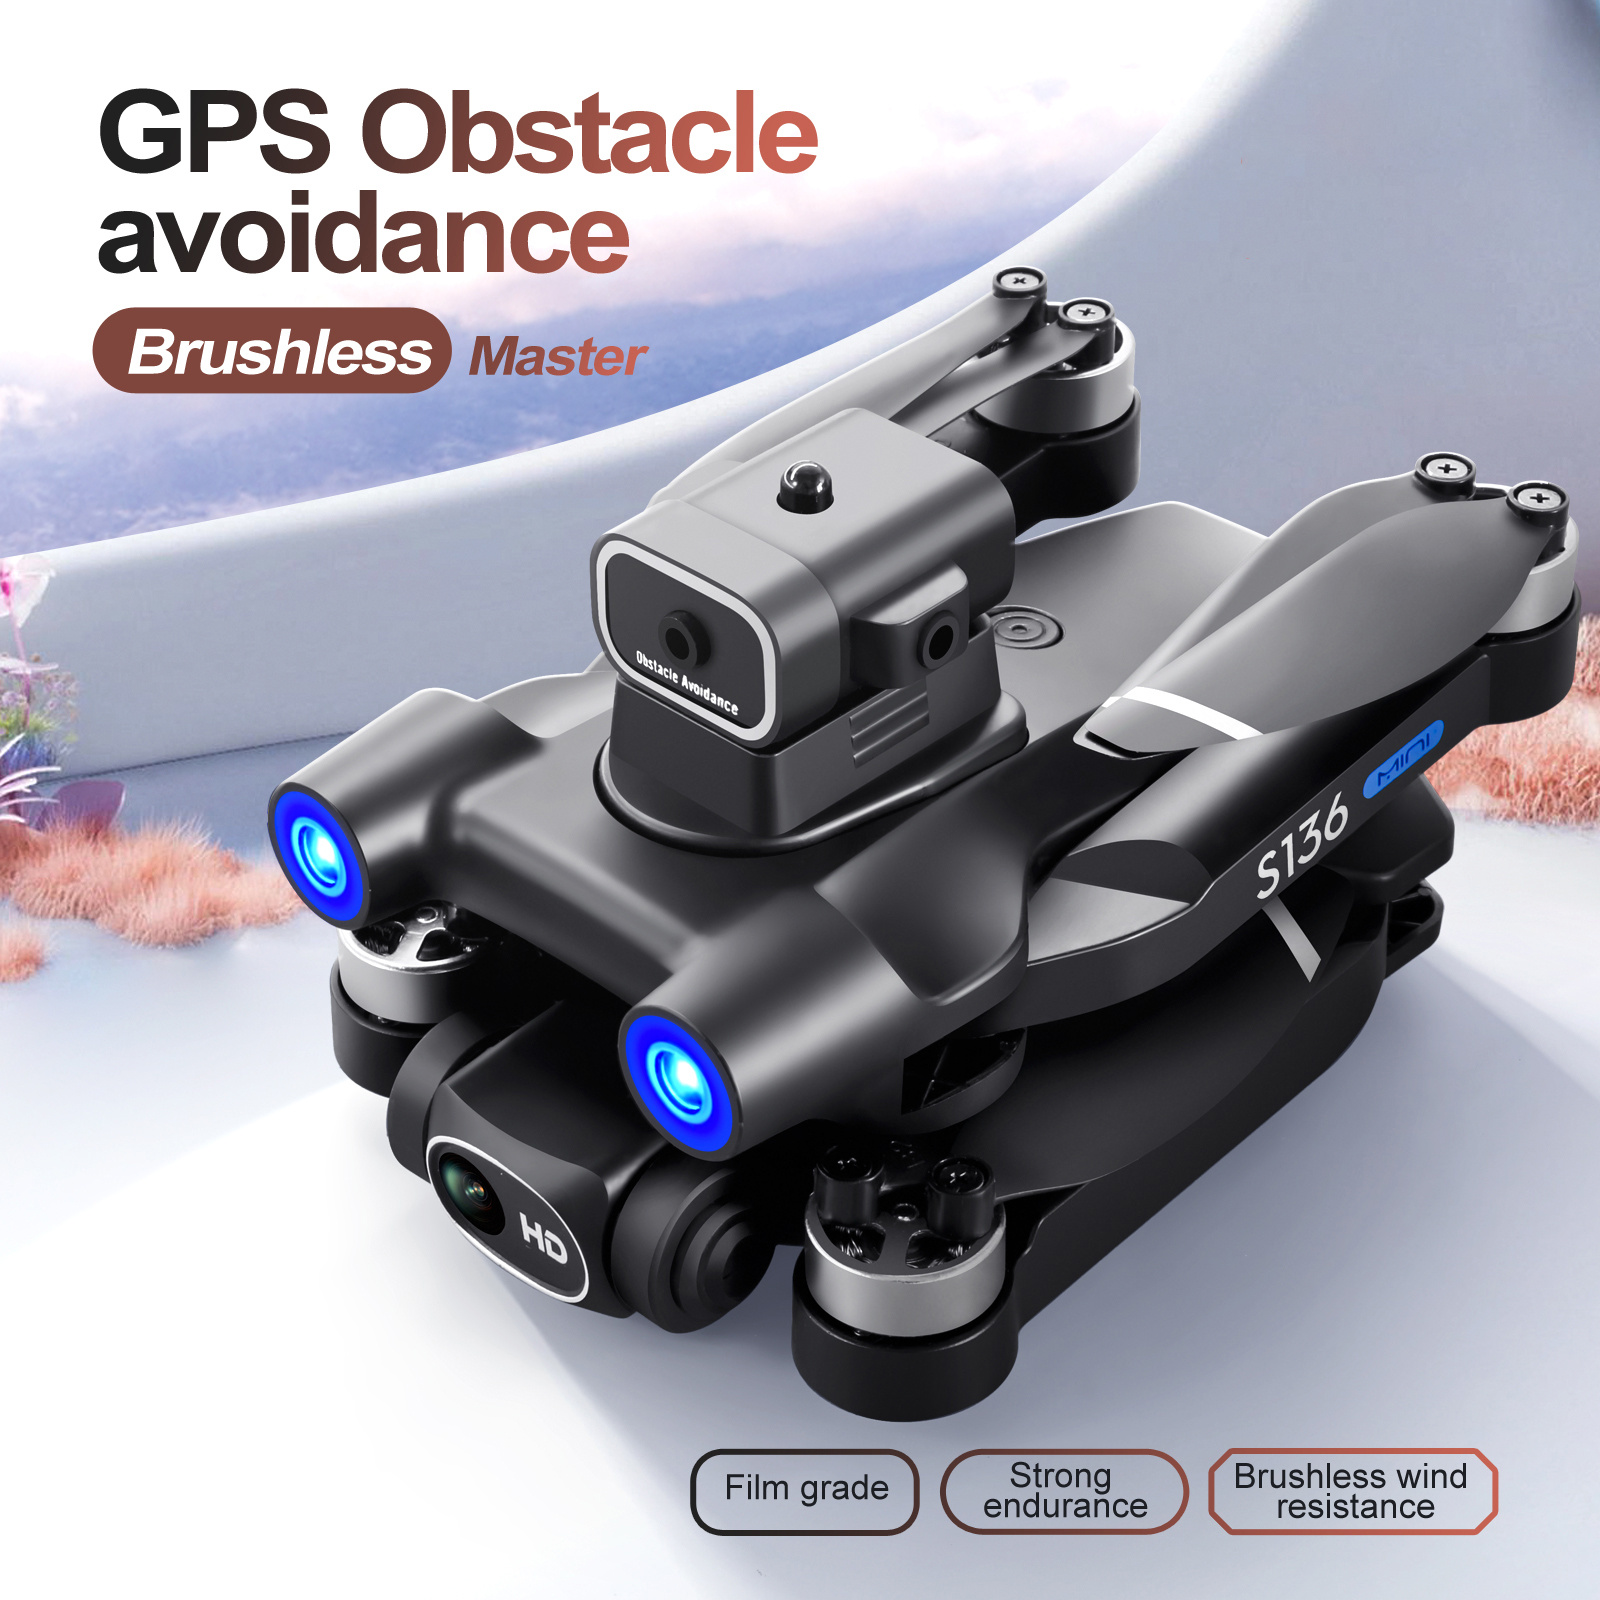 gps positioning drone with brushless motor headless mode intelligent obstacle avoidance optical flow positioning a key return ultra long range intelligent following strong wind resistance details 0